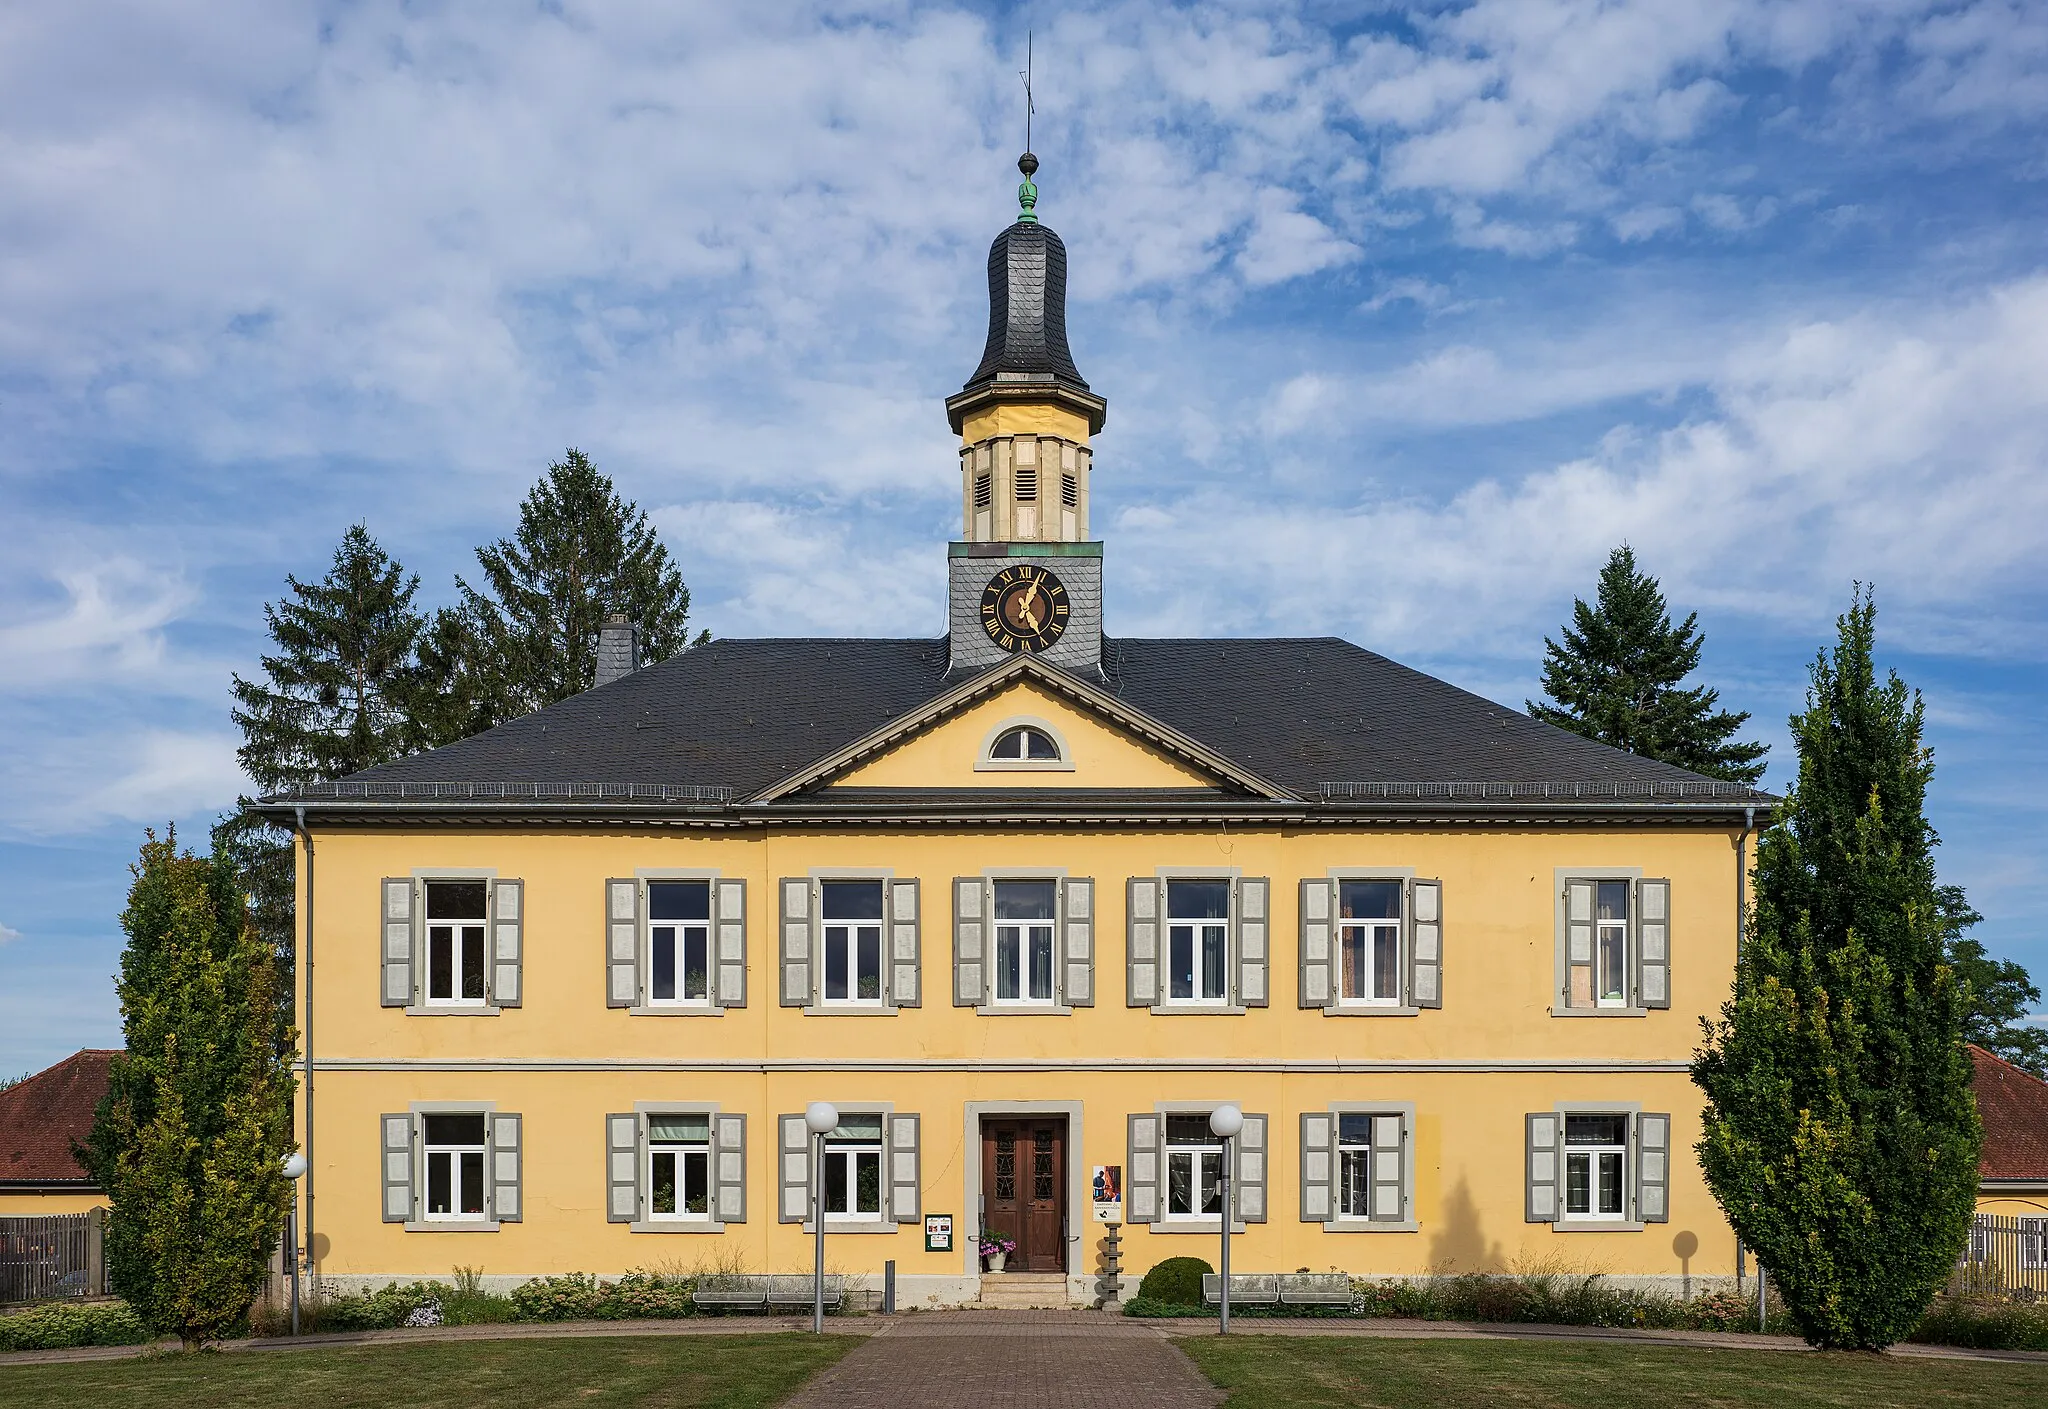 Photo showing: Bad Rappenau: The Saline Office building, view of the main facade from the west. This building, built around 1830, was the seat of the administration of the Ludwigssaline, the salt production from which was once very important.